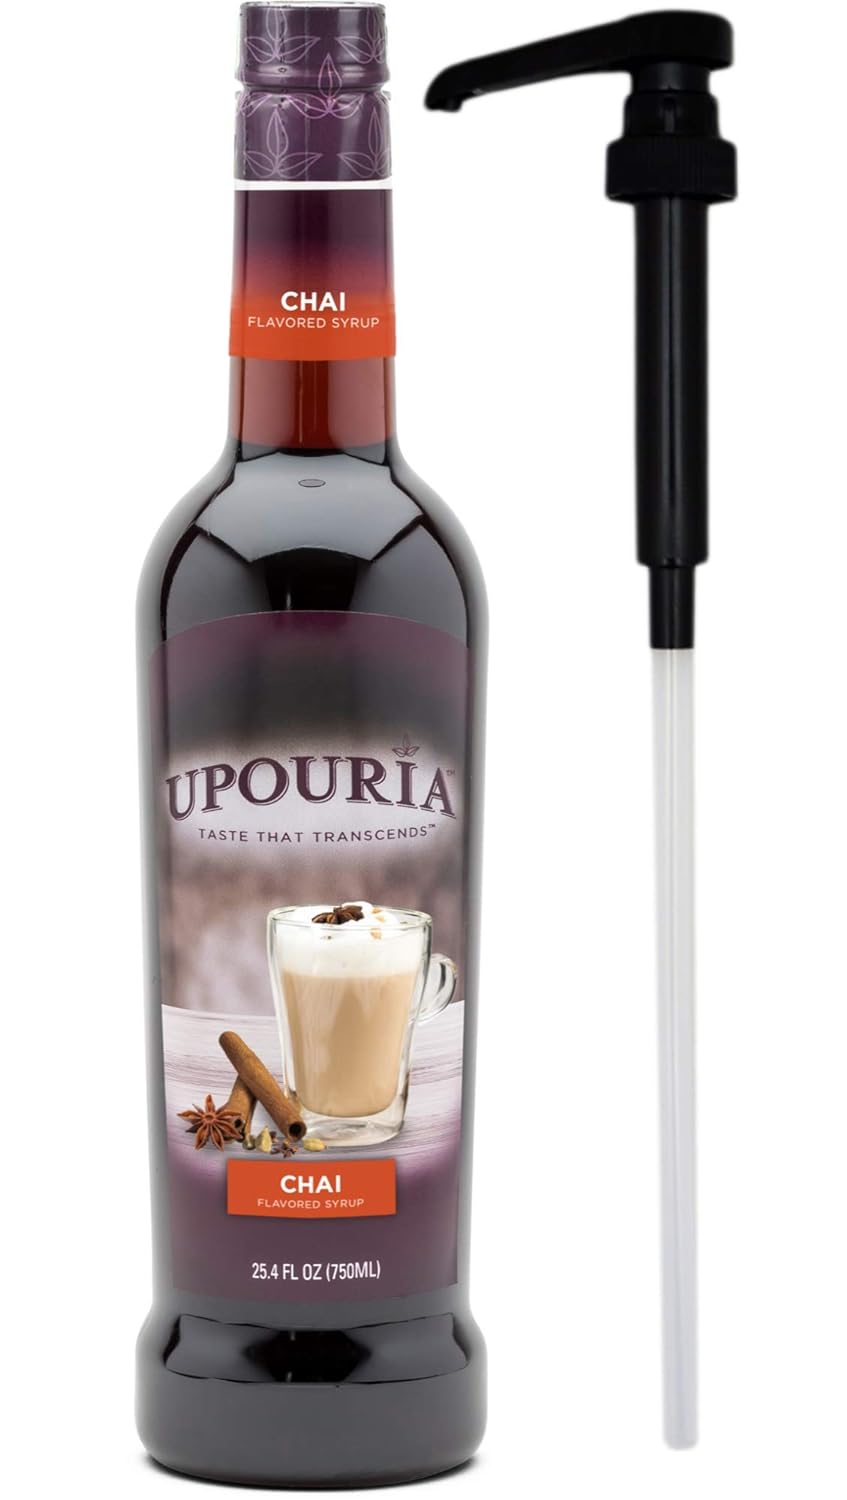 Upouria Chai Tea Spice Flavoring Syrup, 100% Vegan, Gluten-Free, Kosher, 750 mL Bottle - Coffee Syrup Pump Included